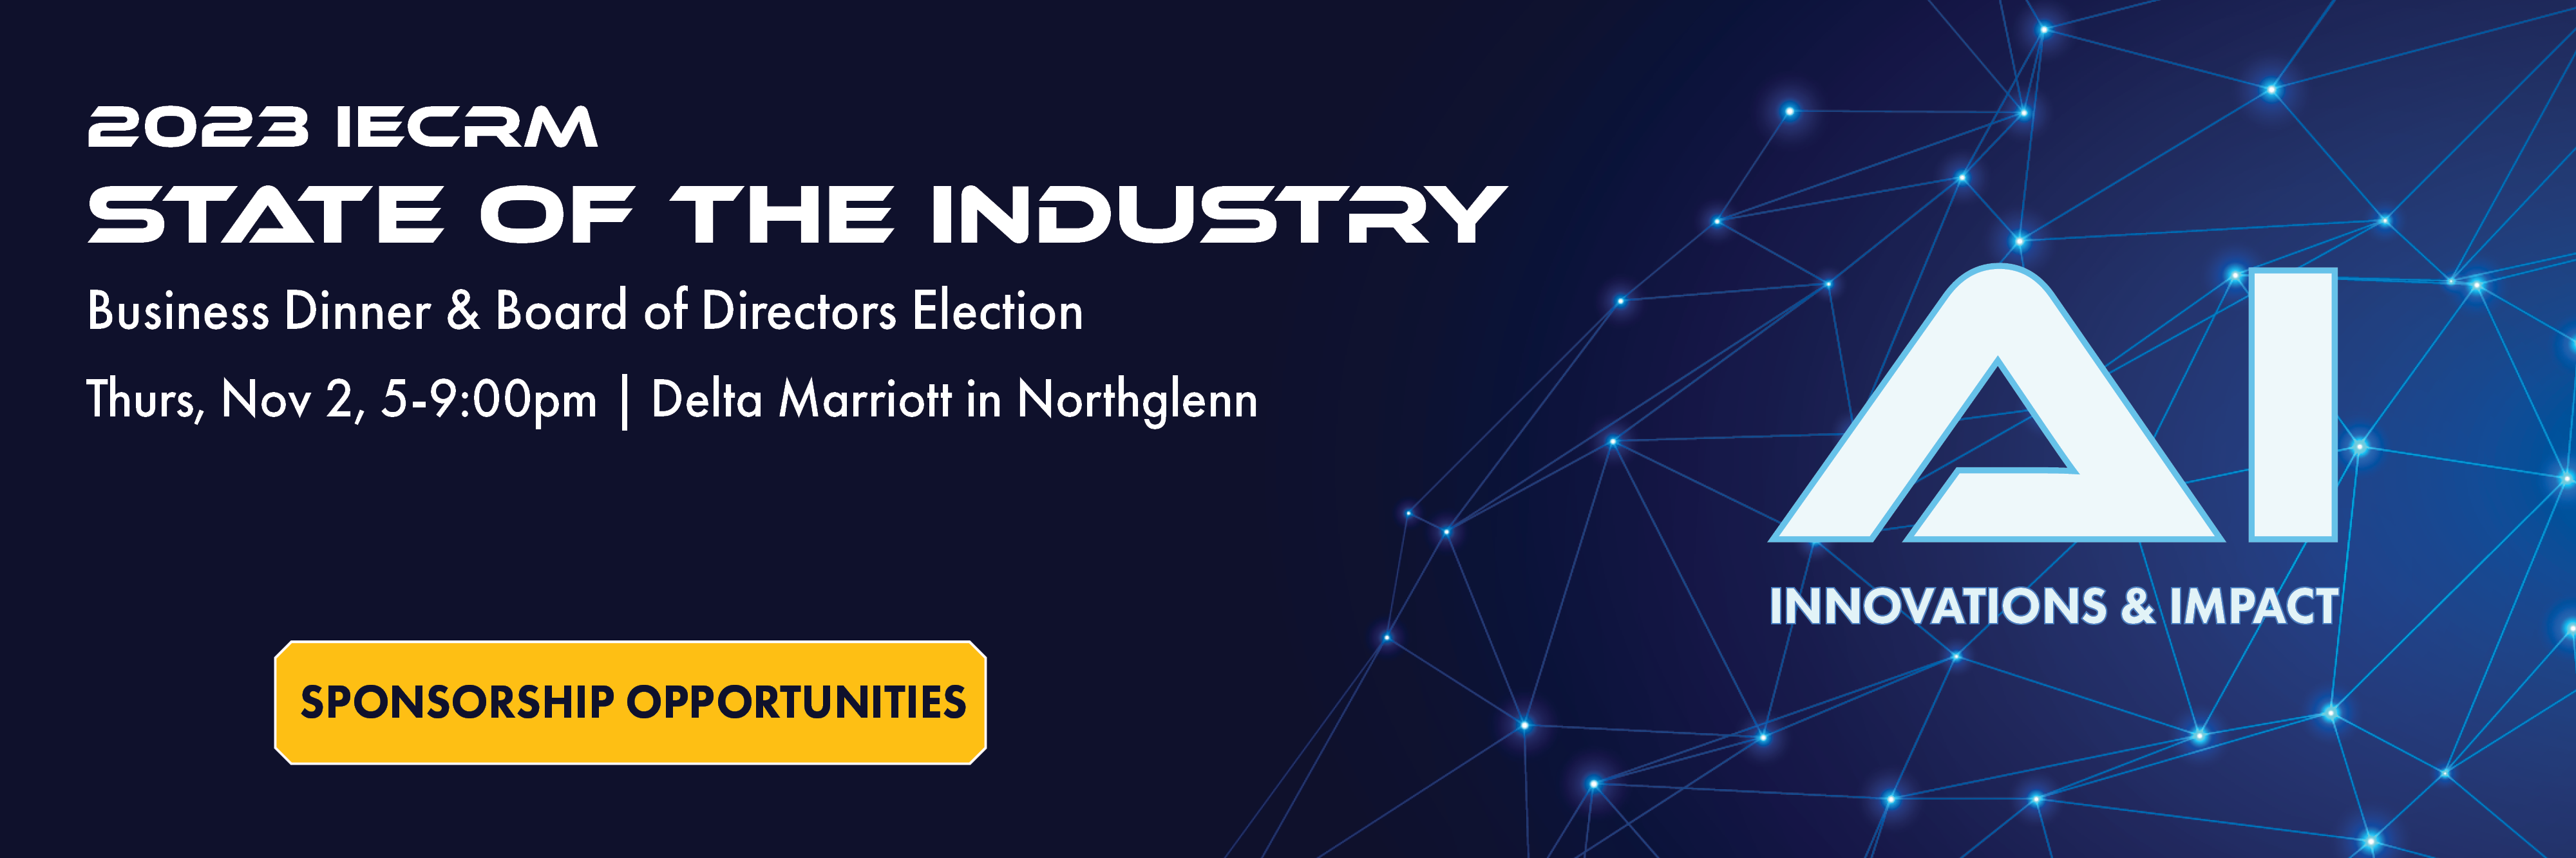 SPONSOR the 2023 IECRM State of the Industry Dinner